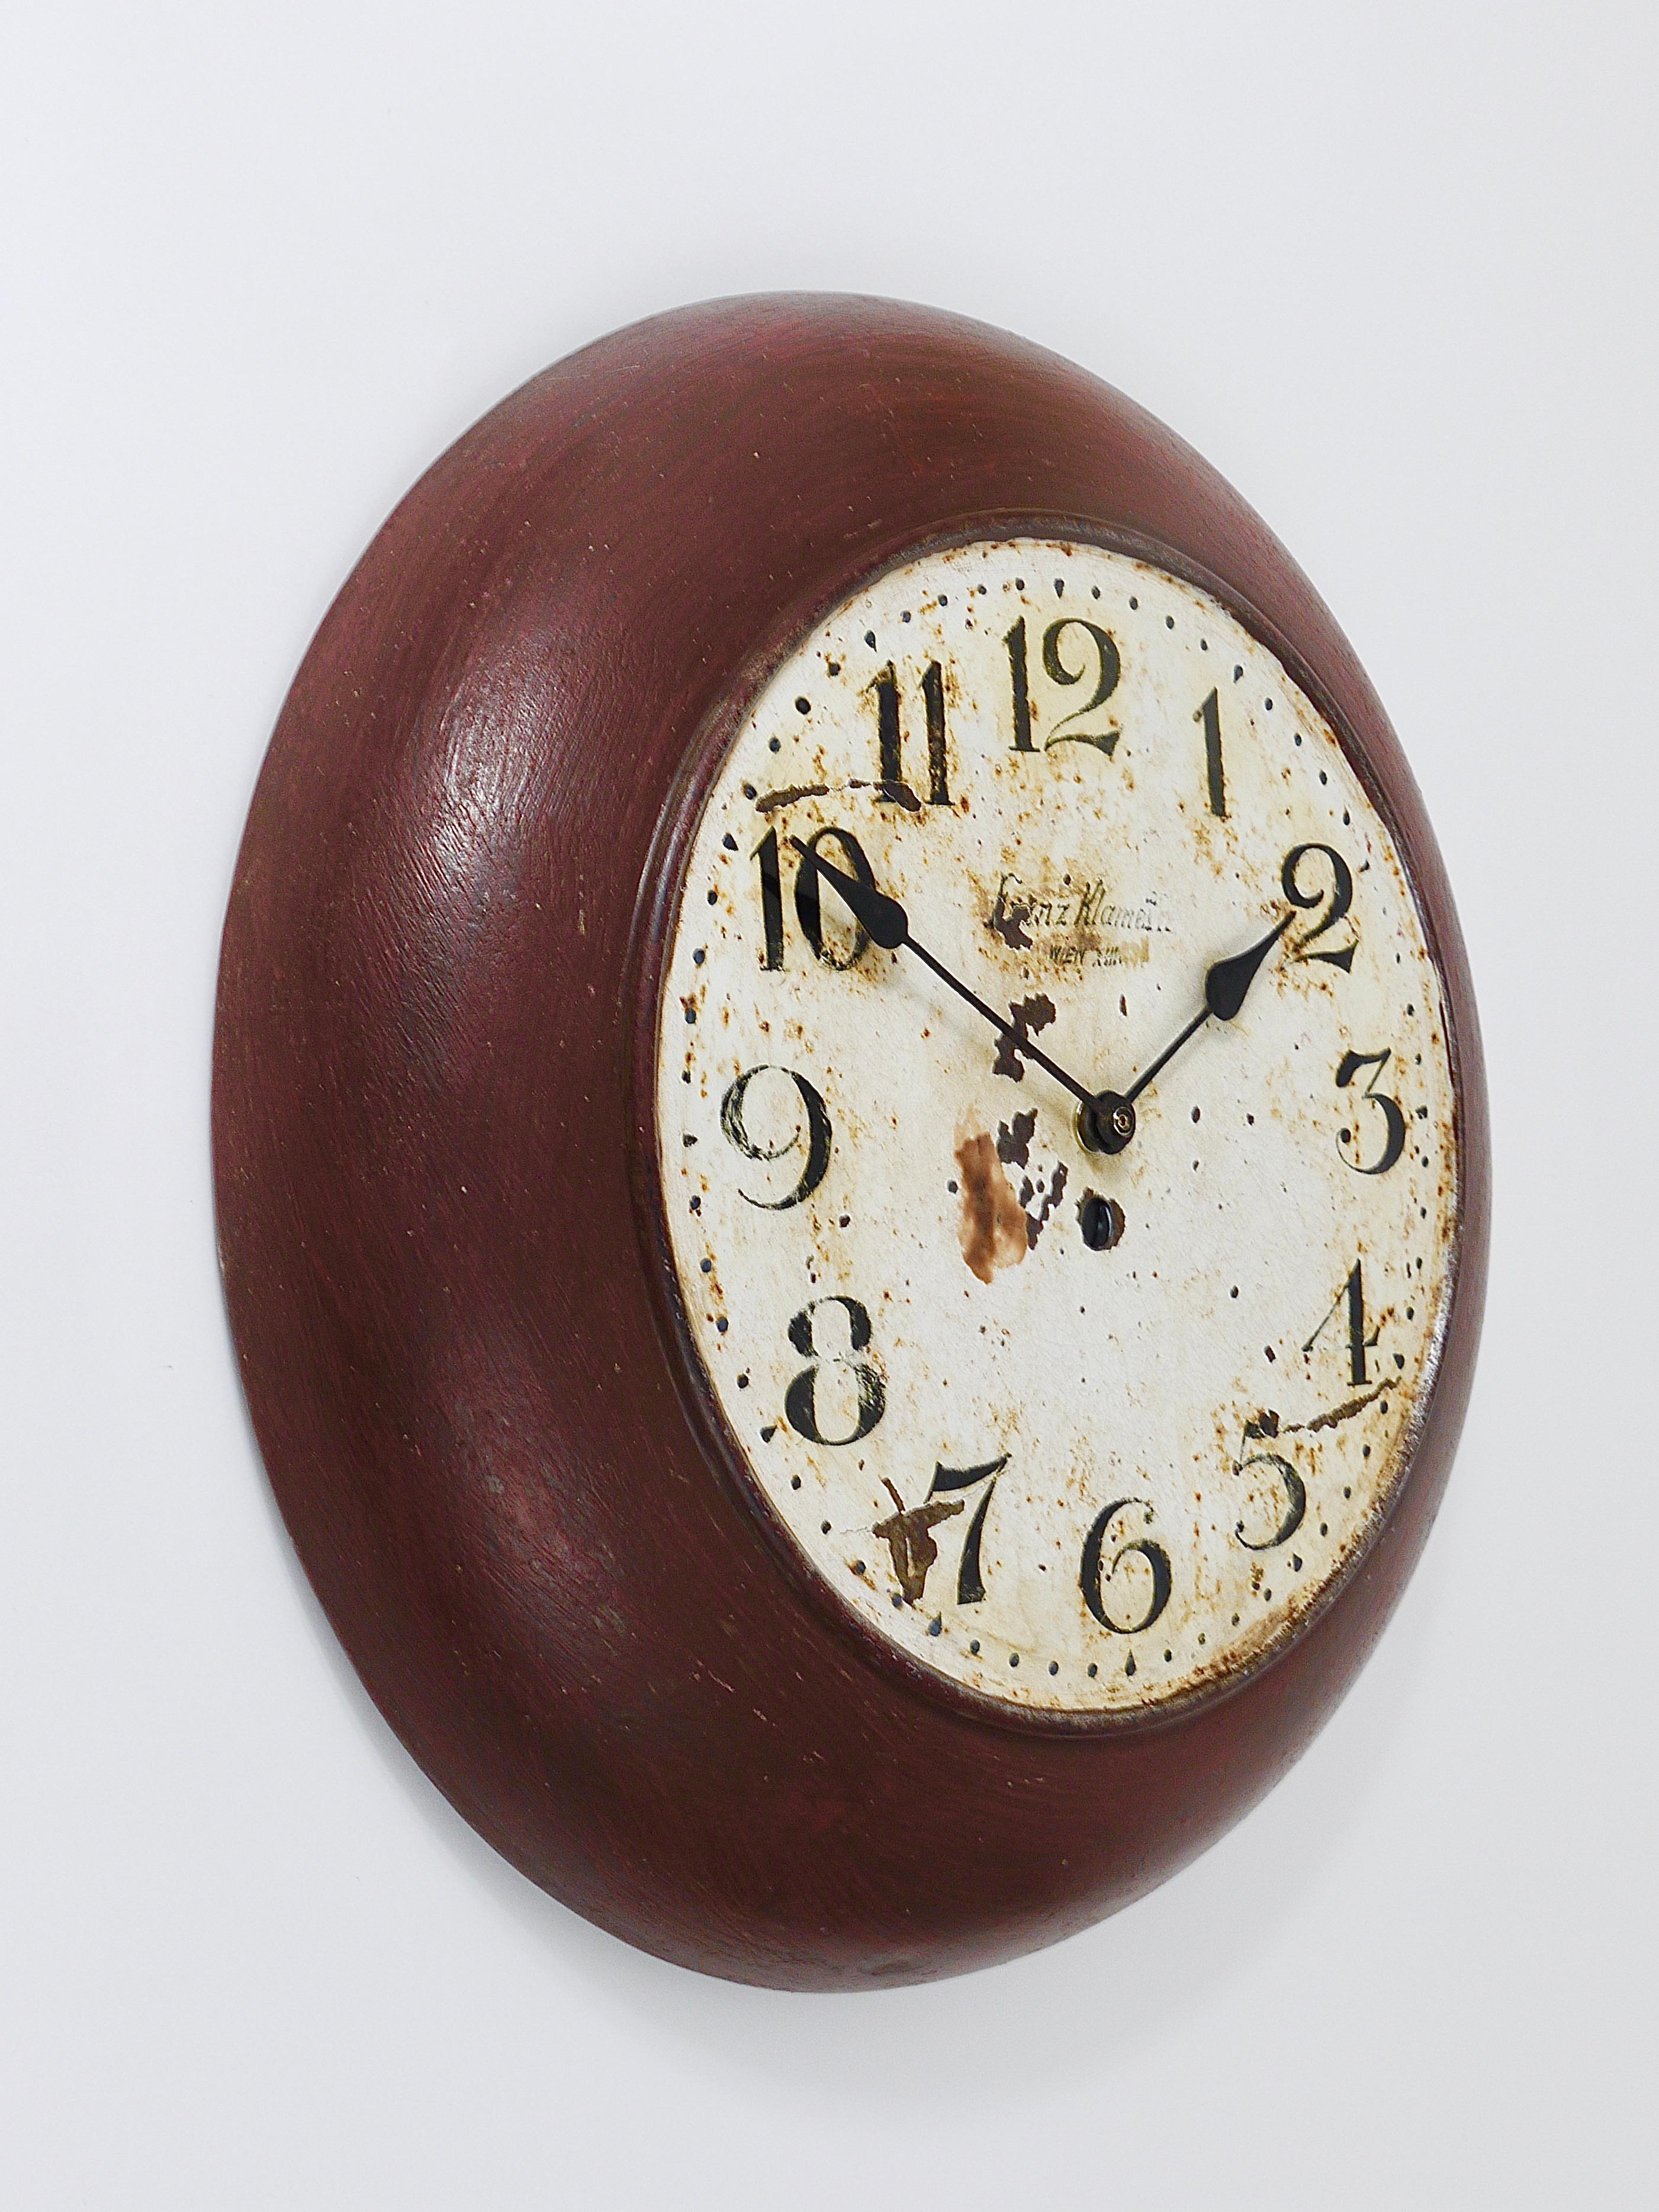 Antique 1920s Public Iron Wall Clock With Hand-Painted Dial, Industrial Style For Sale 5